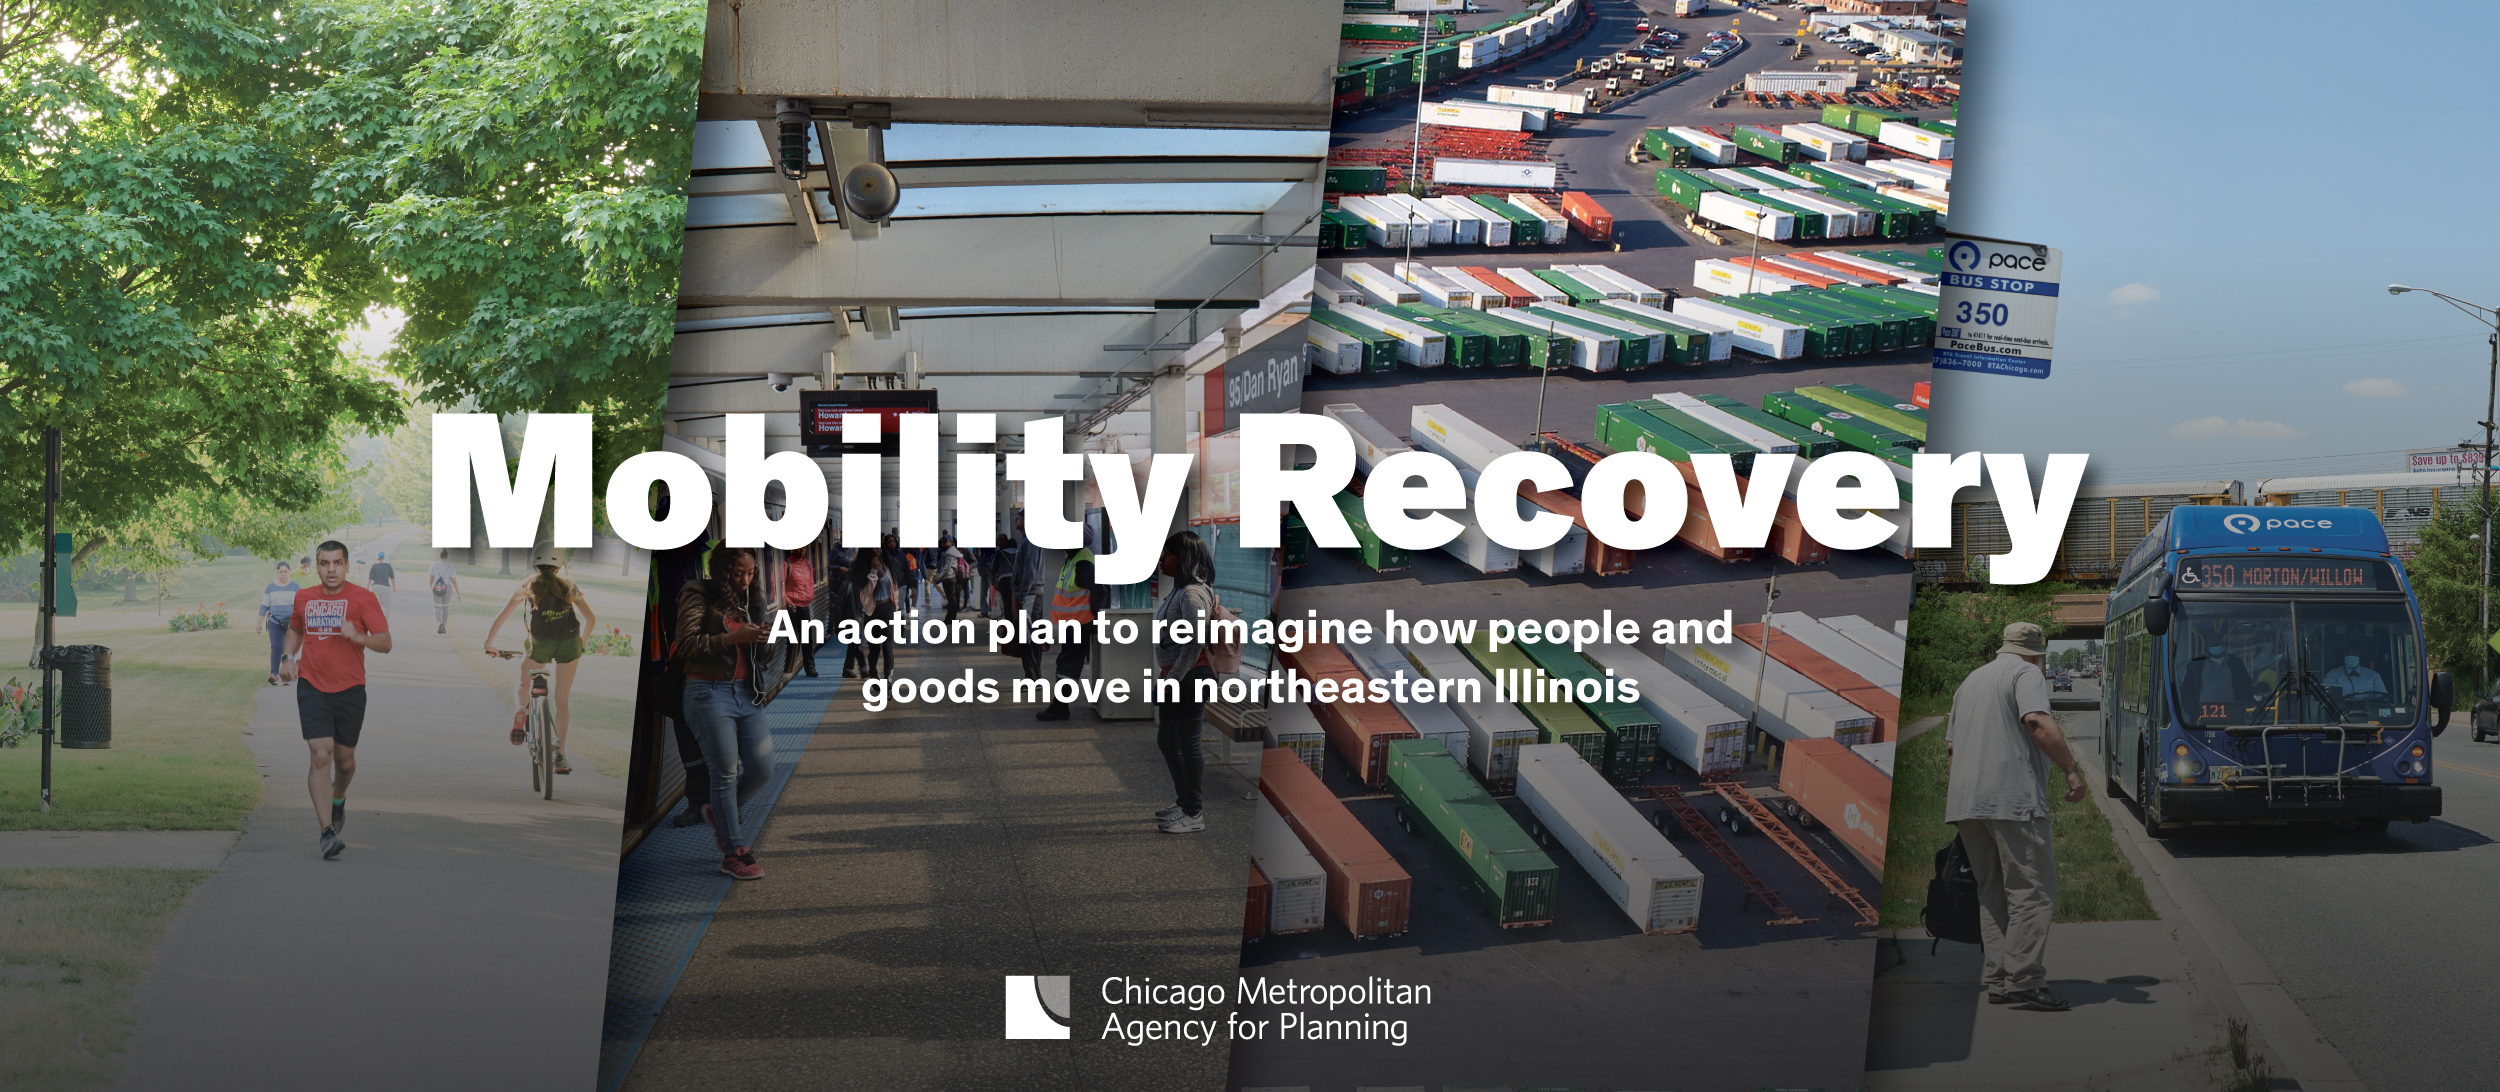 Mobility recovery: An action plan to reimagine how people and goods move in northeastern Illinois